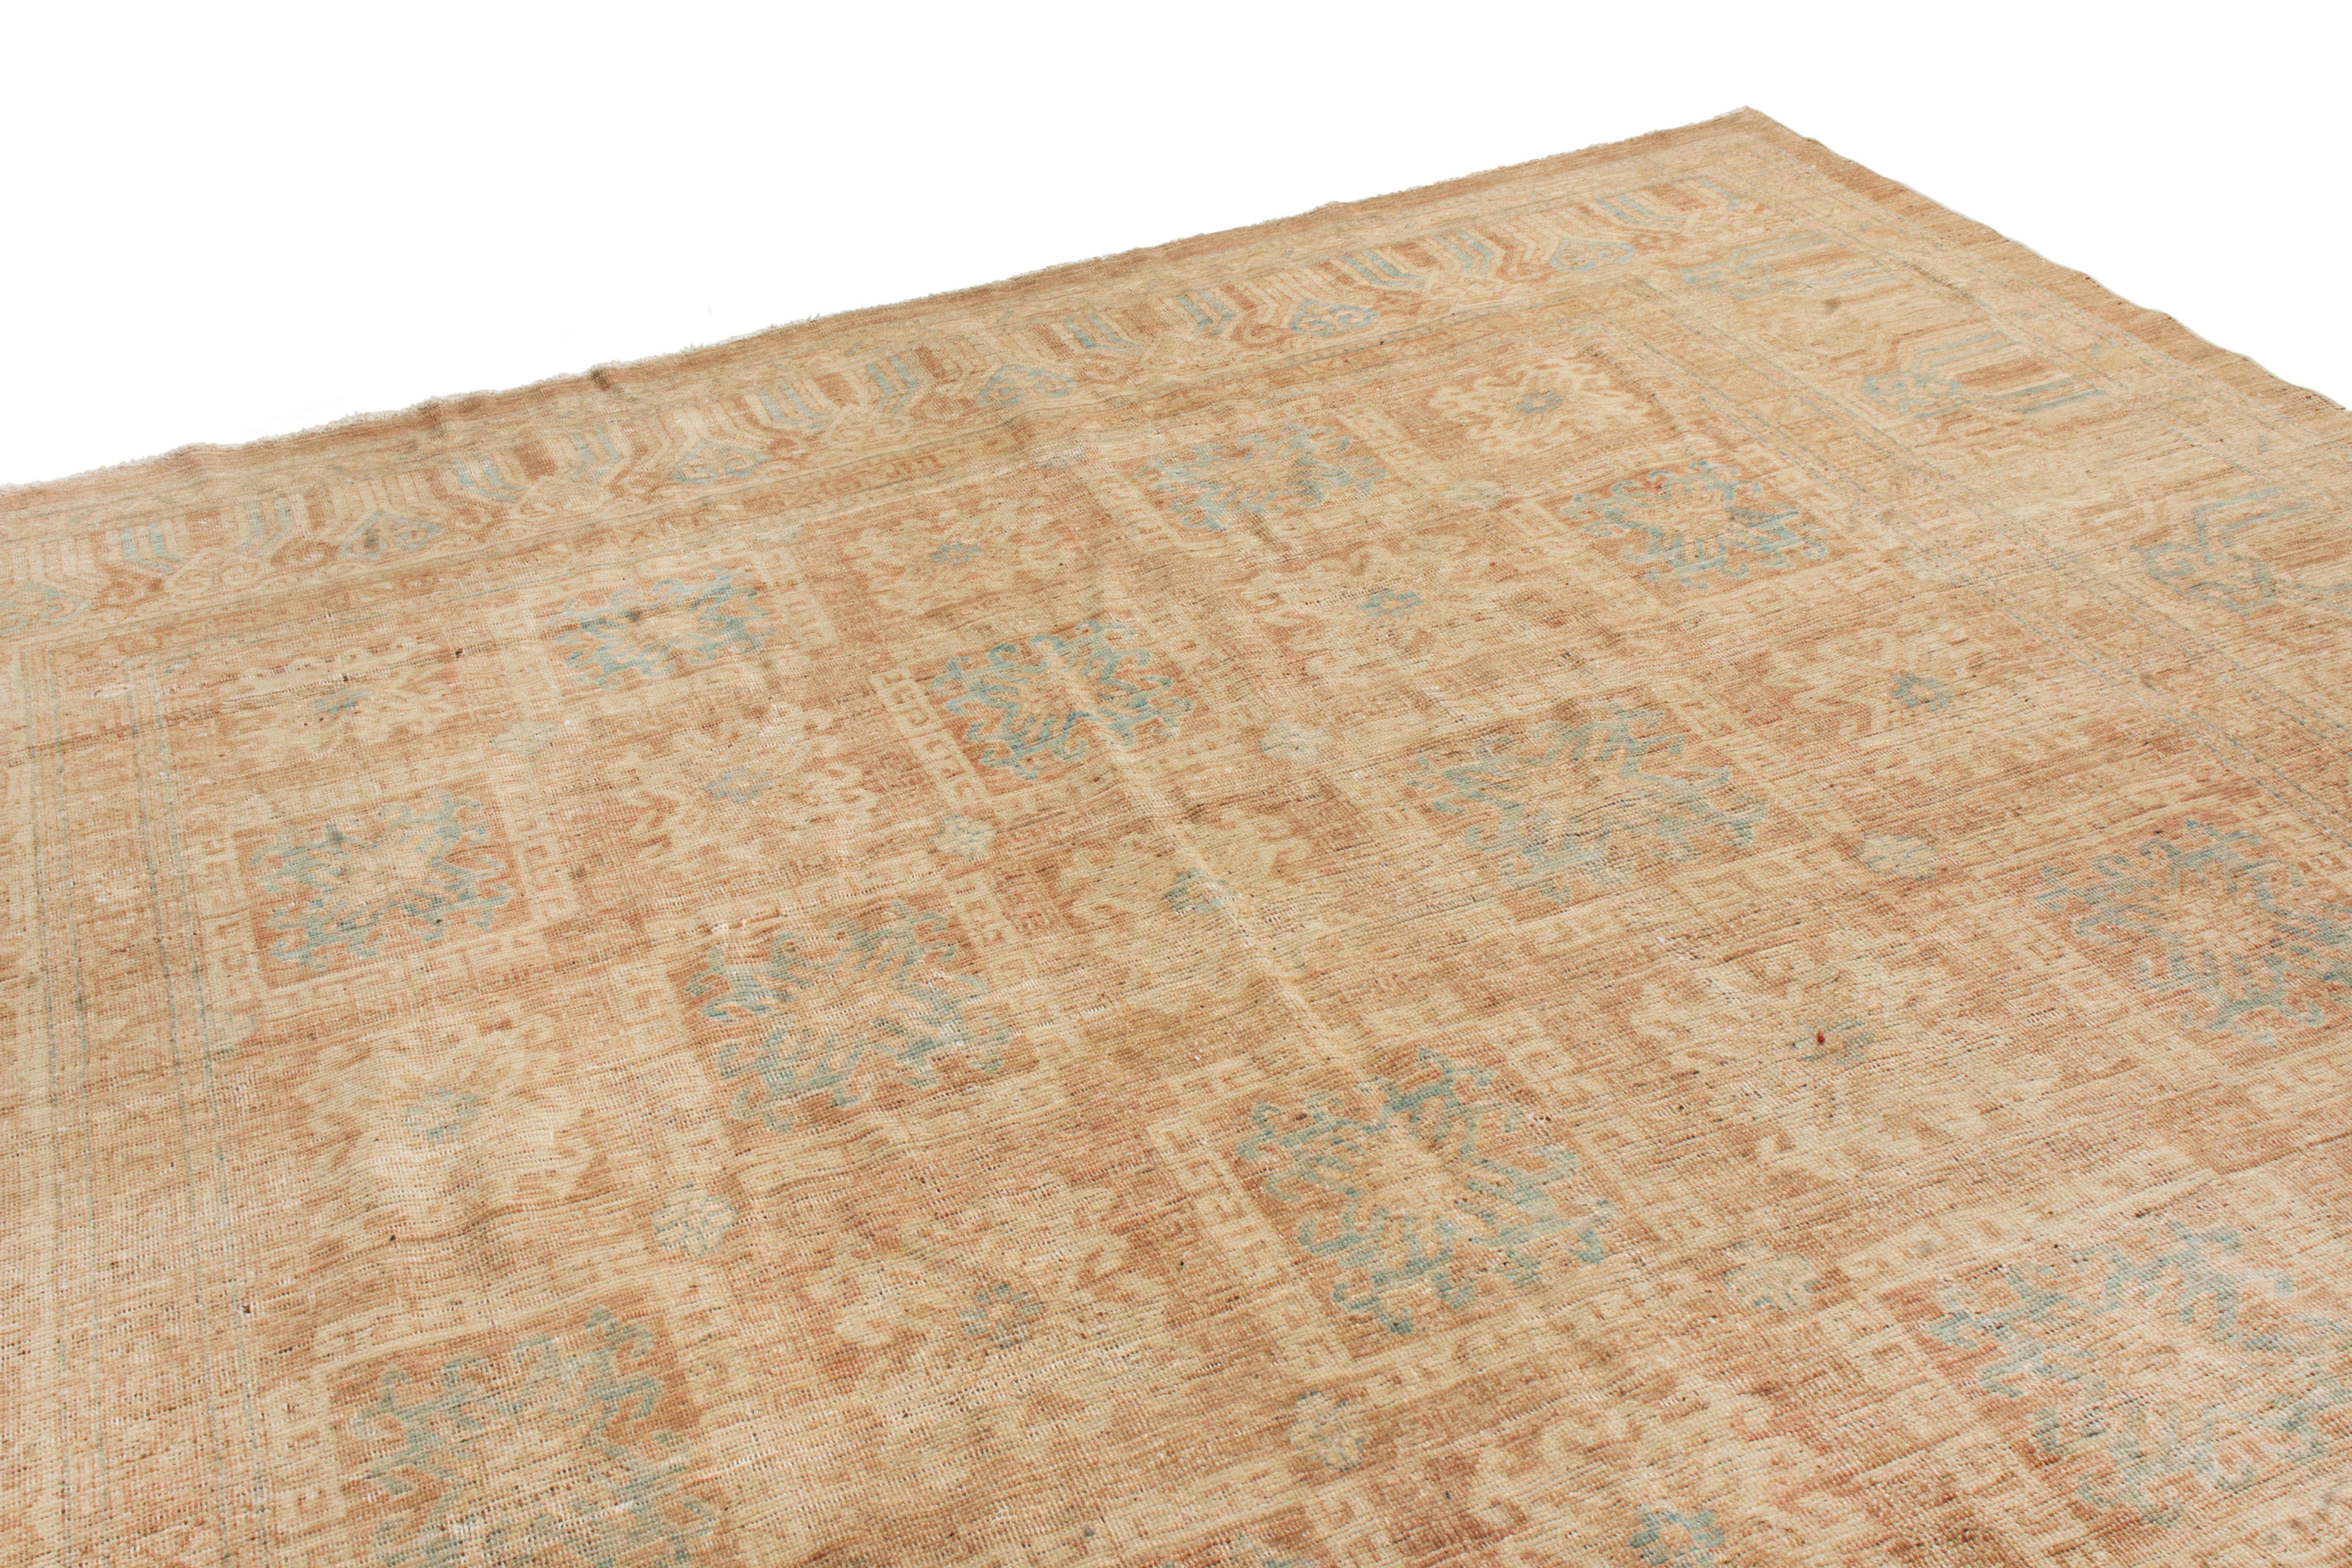 Hand knotted in high-quality wool originating from East Turkestan, this Khotan rug enjoys a rare variant of the classical cloudband border inspired frolic antique and vintage pieces complementing the simple elegance of its sky blue and beige